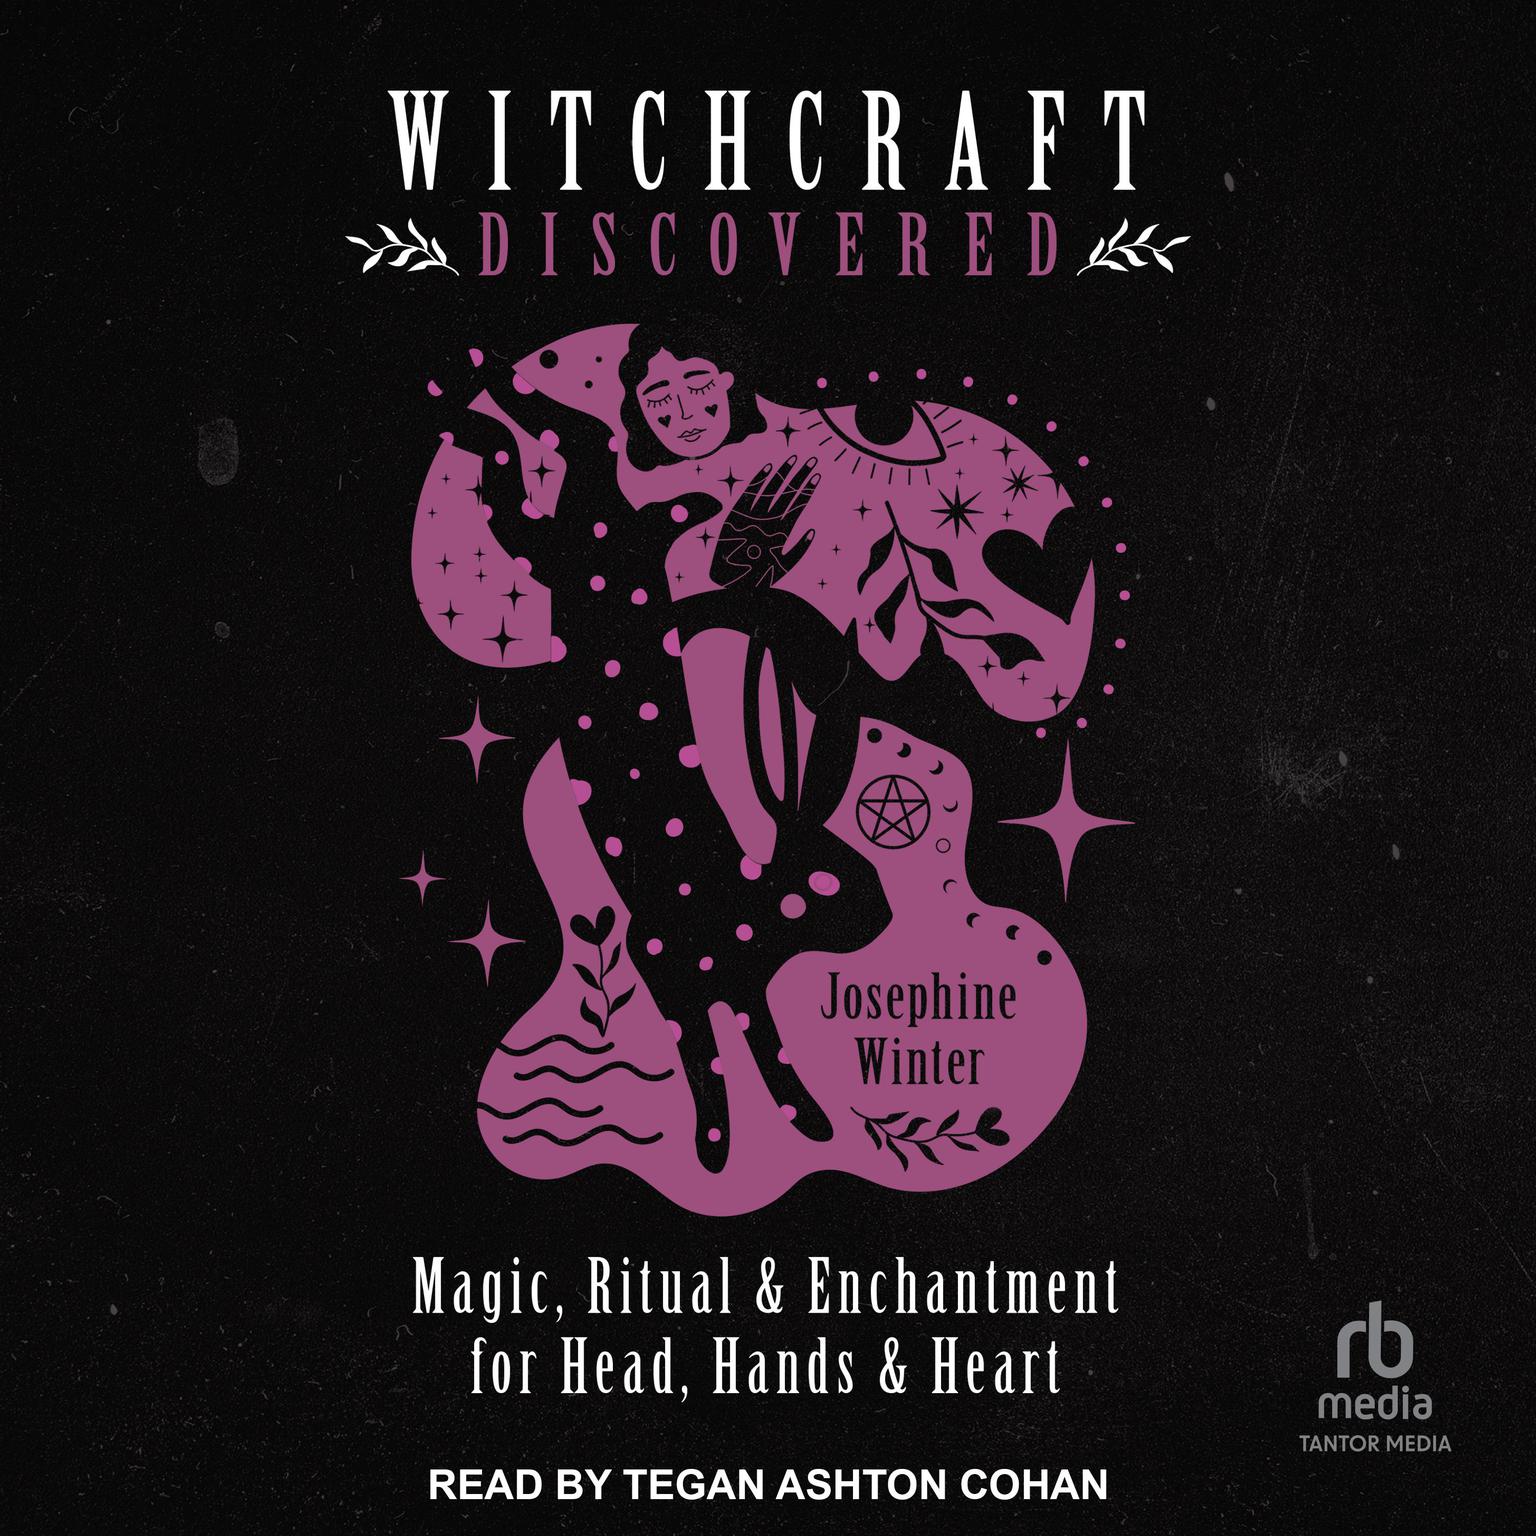 Witchcraft Discovered: Magic, Ritual & Enchantment for Head, Hands & Heart Audiobook, by Josephine Winter